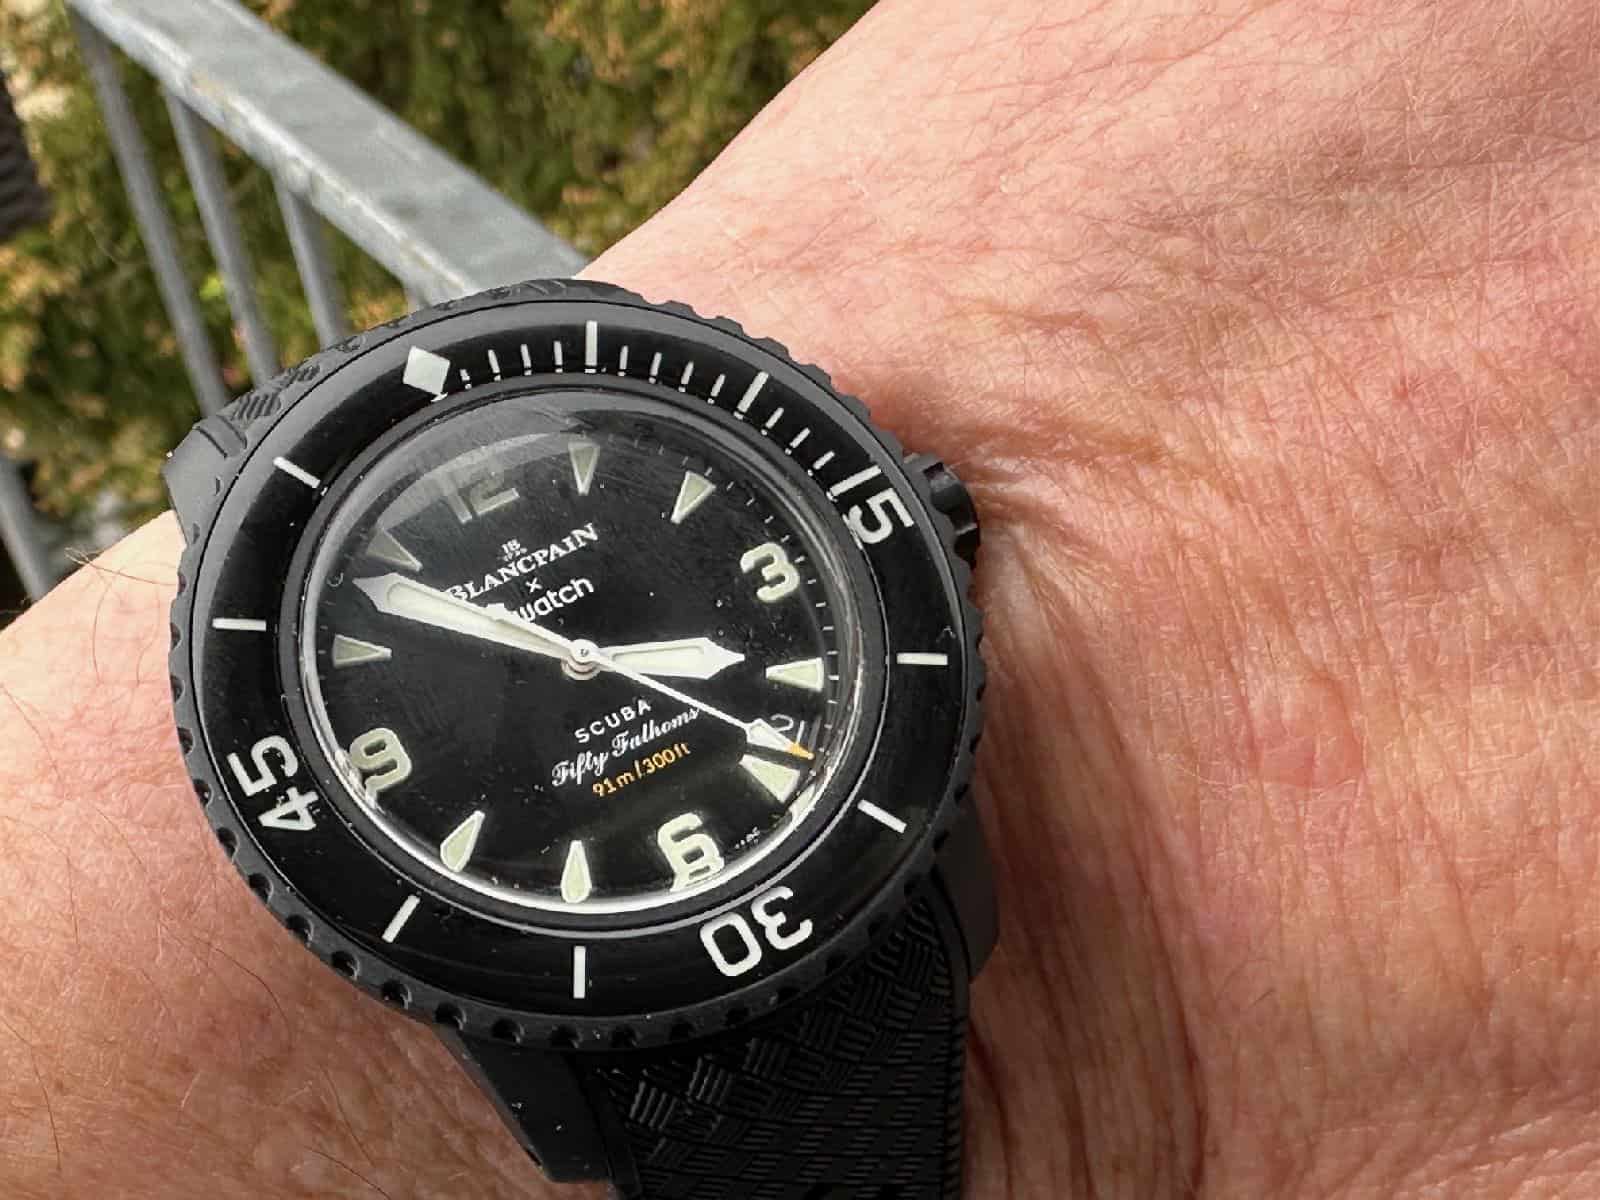 Blancpain x Swatch Fifty Fathoms Ocean of Storms